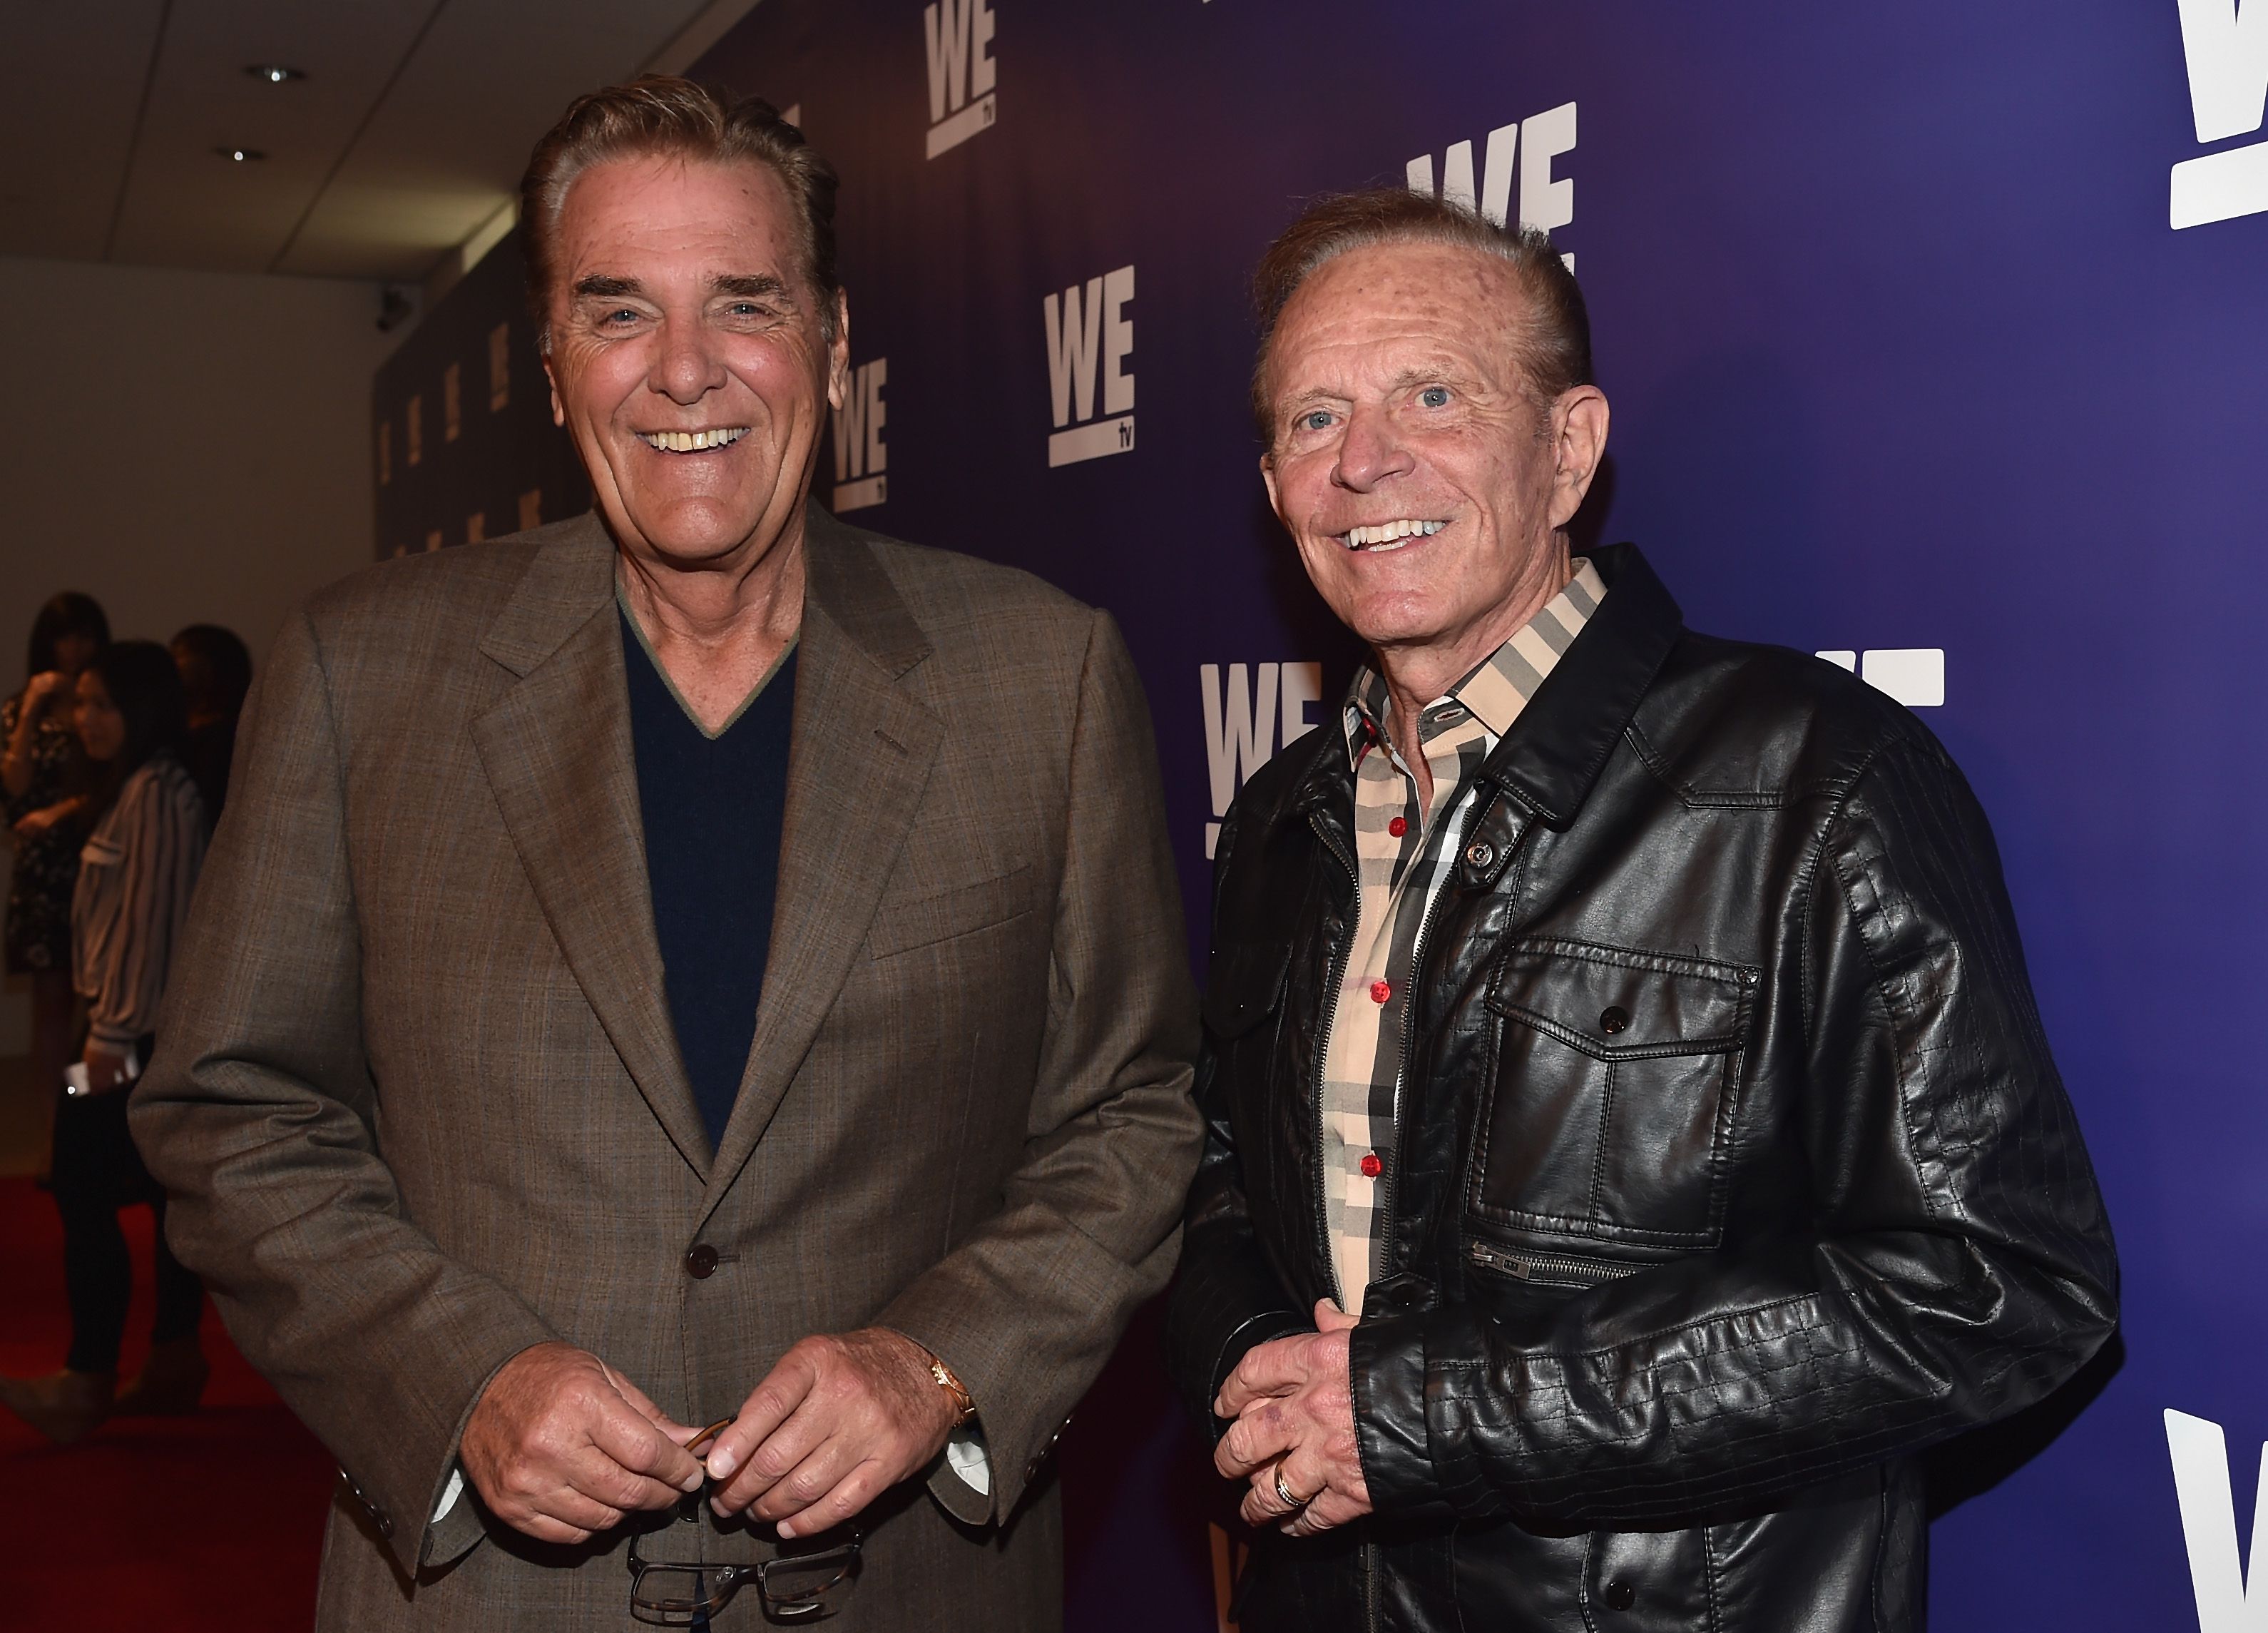 Chuck Woolery and Bob Eubanks stand together in jackets.